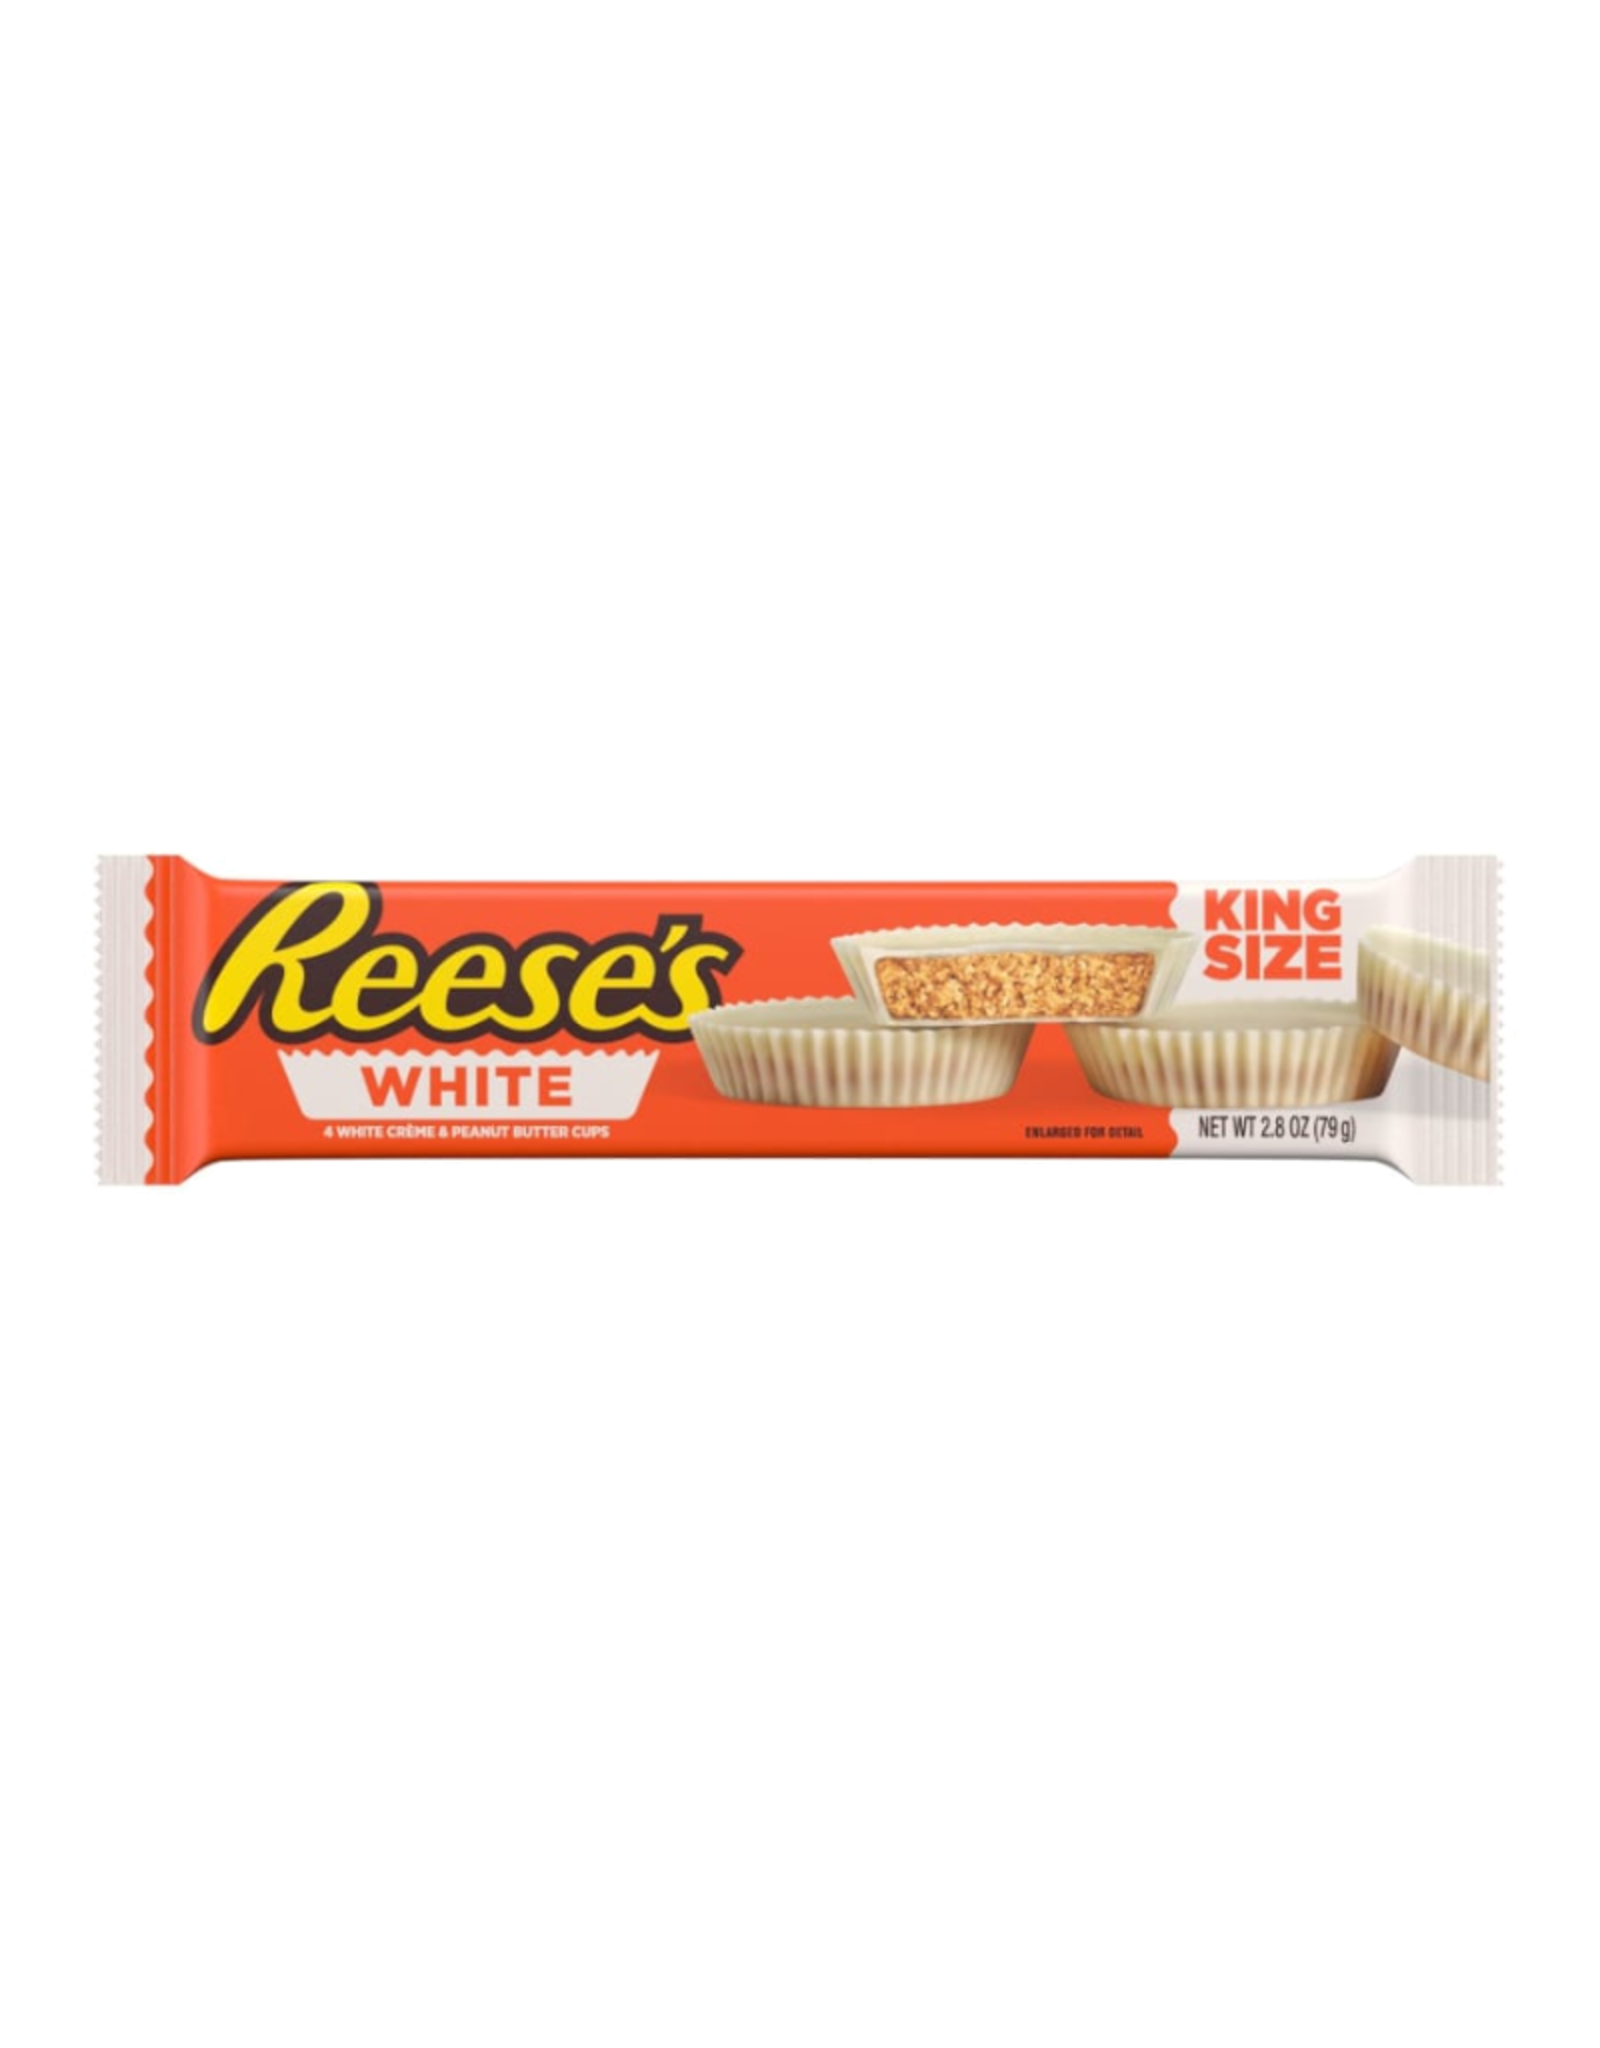 Reese's White 4 Peanut Butter Cups King Size - 79g